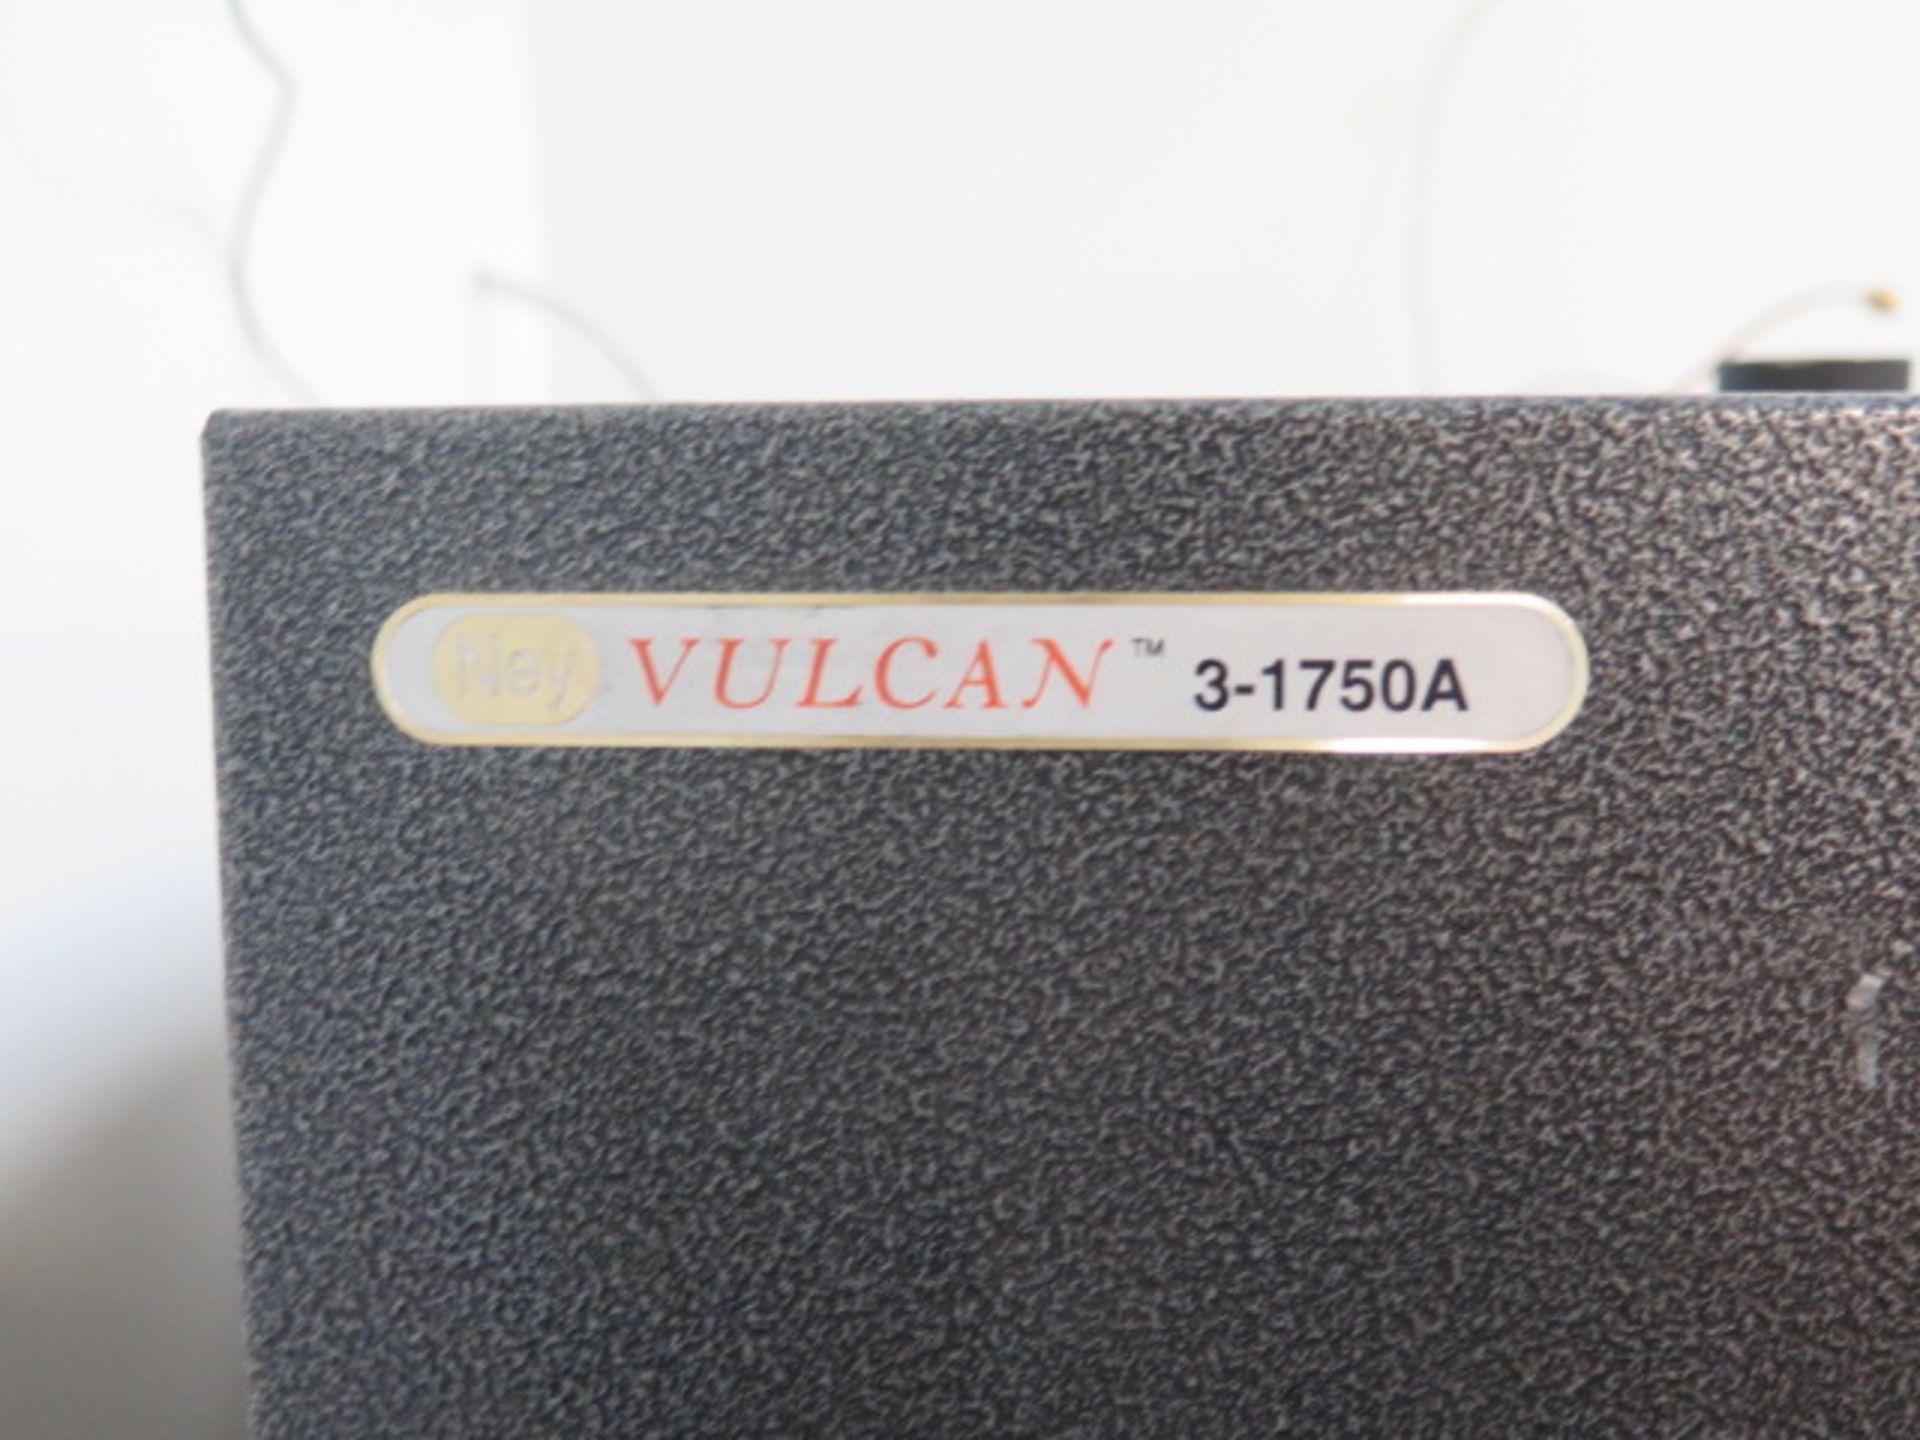 Vulcan mdl. 3-1750A 1100 Deg C / 2012 Deg F Electric Furnace, SOLD AS IS AND WITH NO WARRANTY - Image 4 of 4